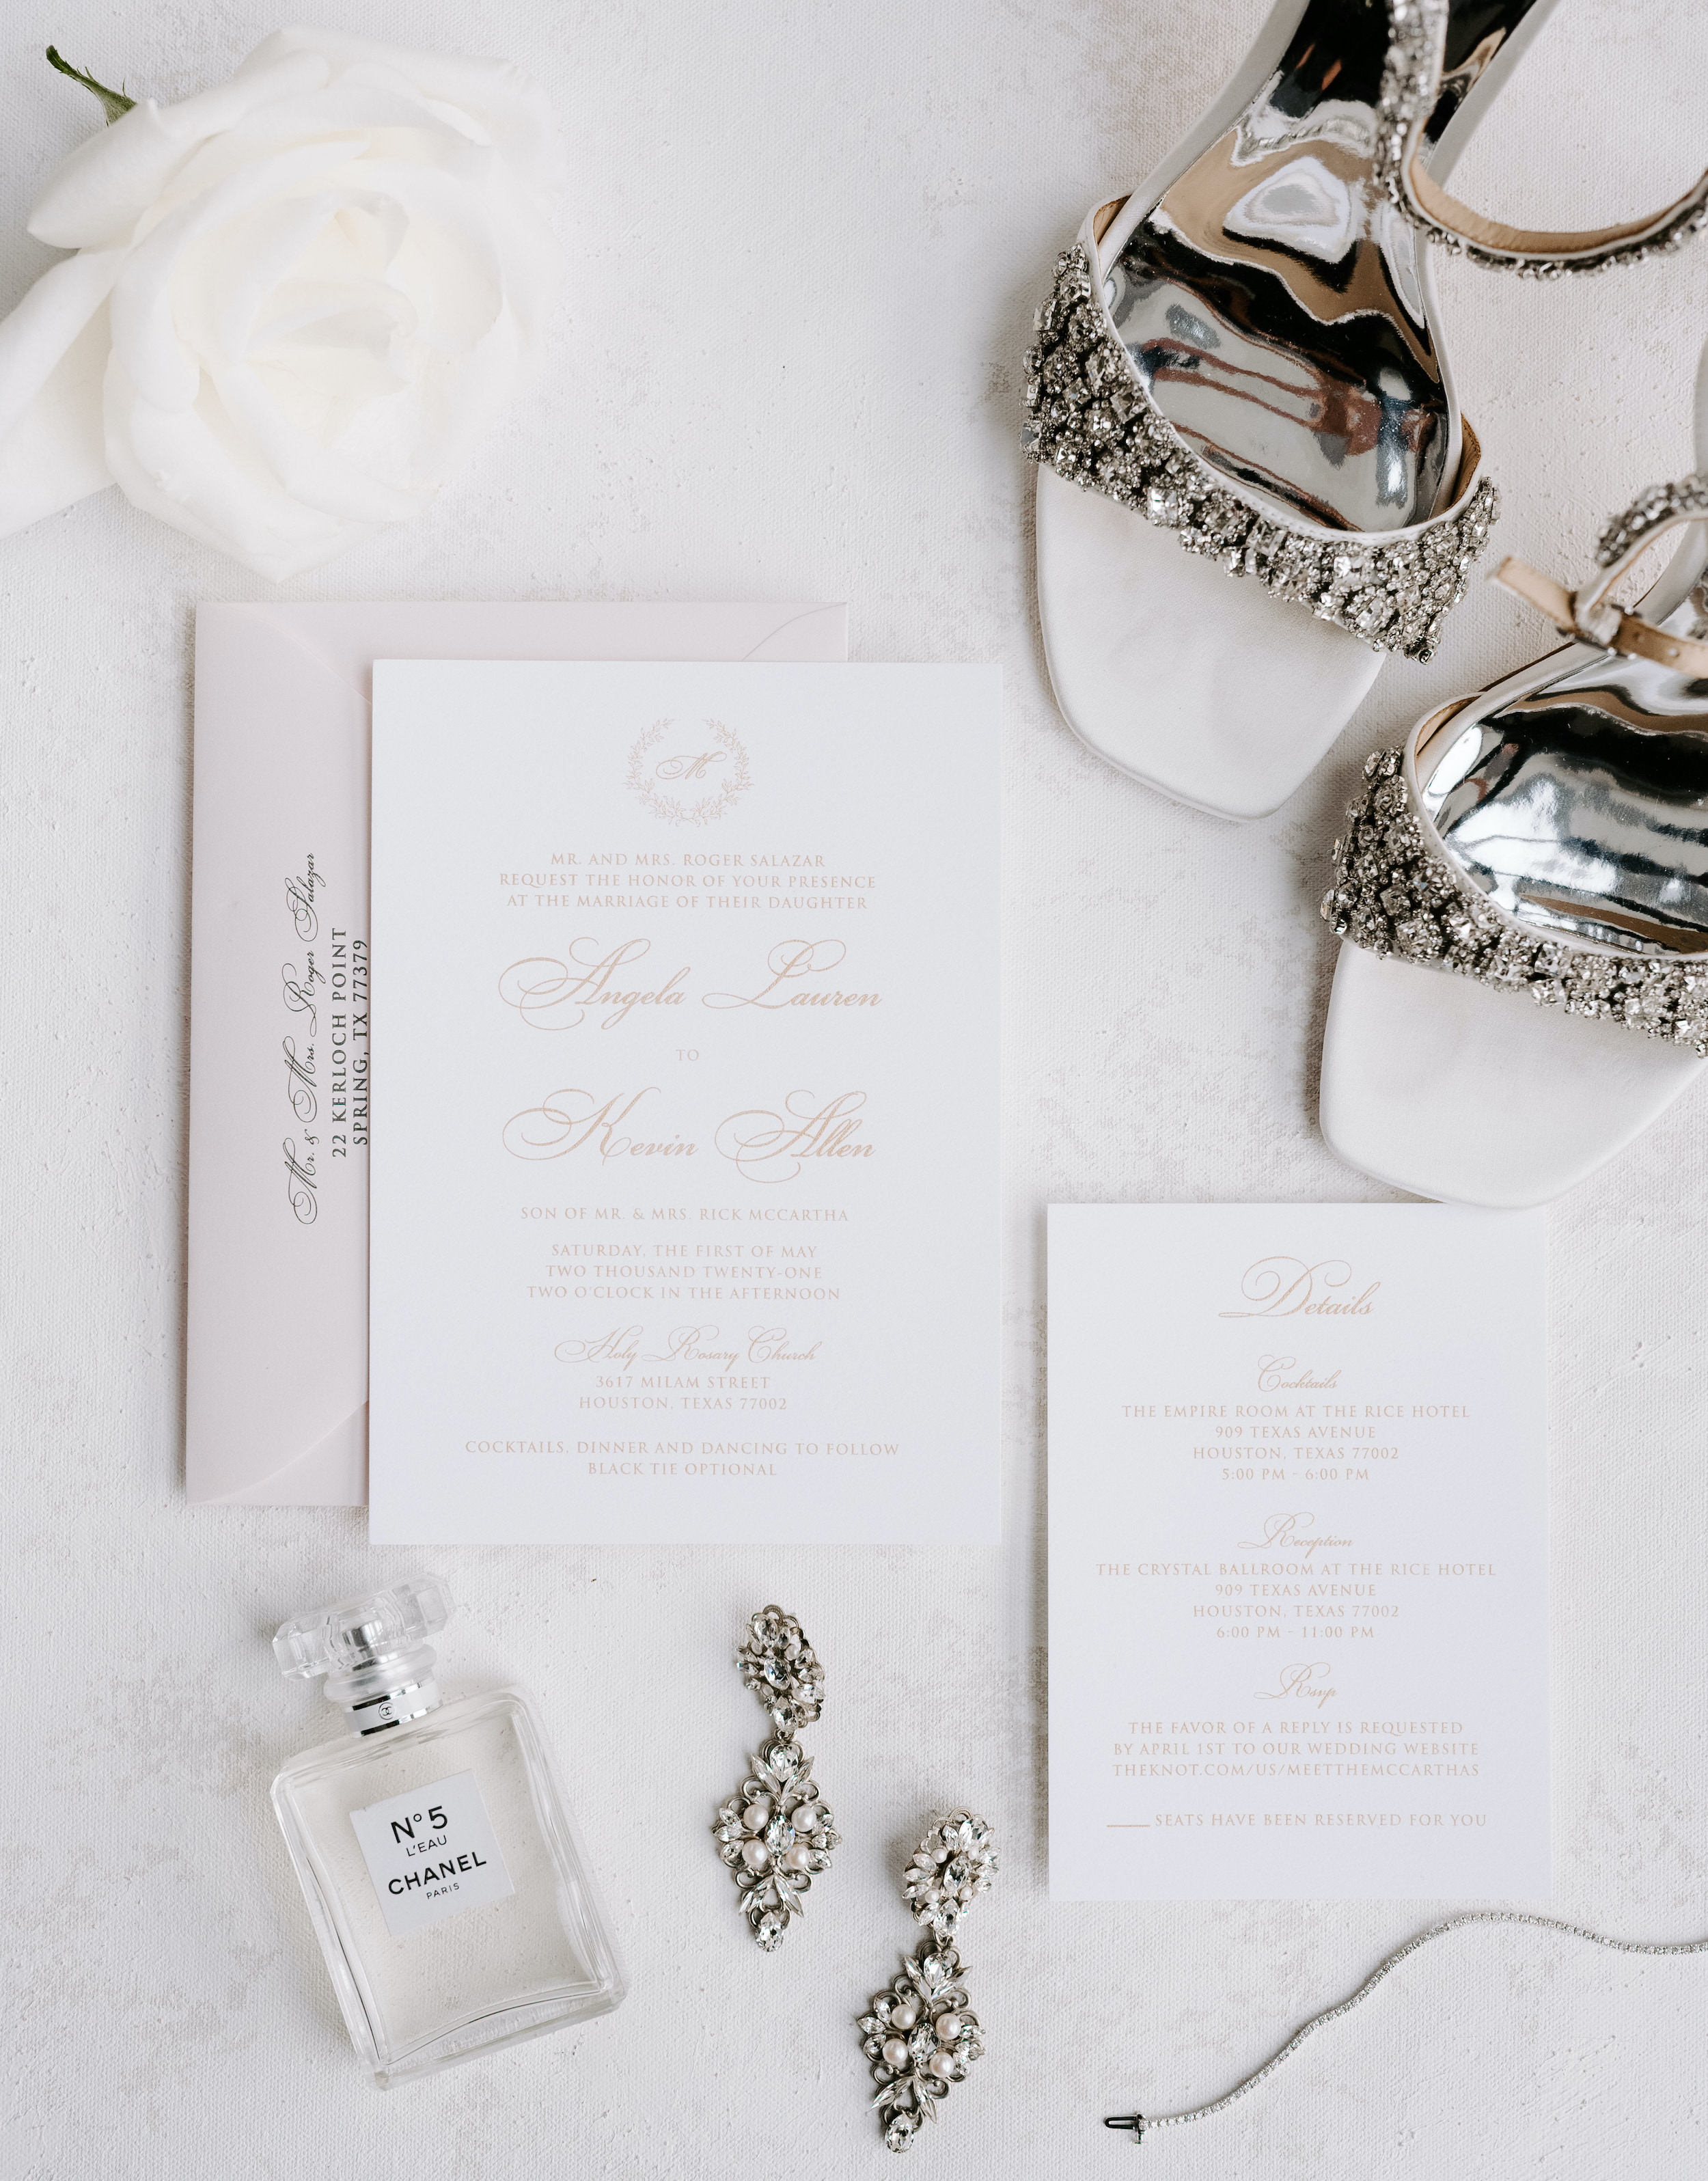 A flat lay with the wedding invitations for the elegant rainy wedding.